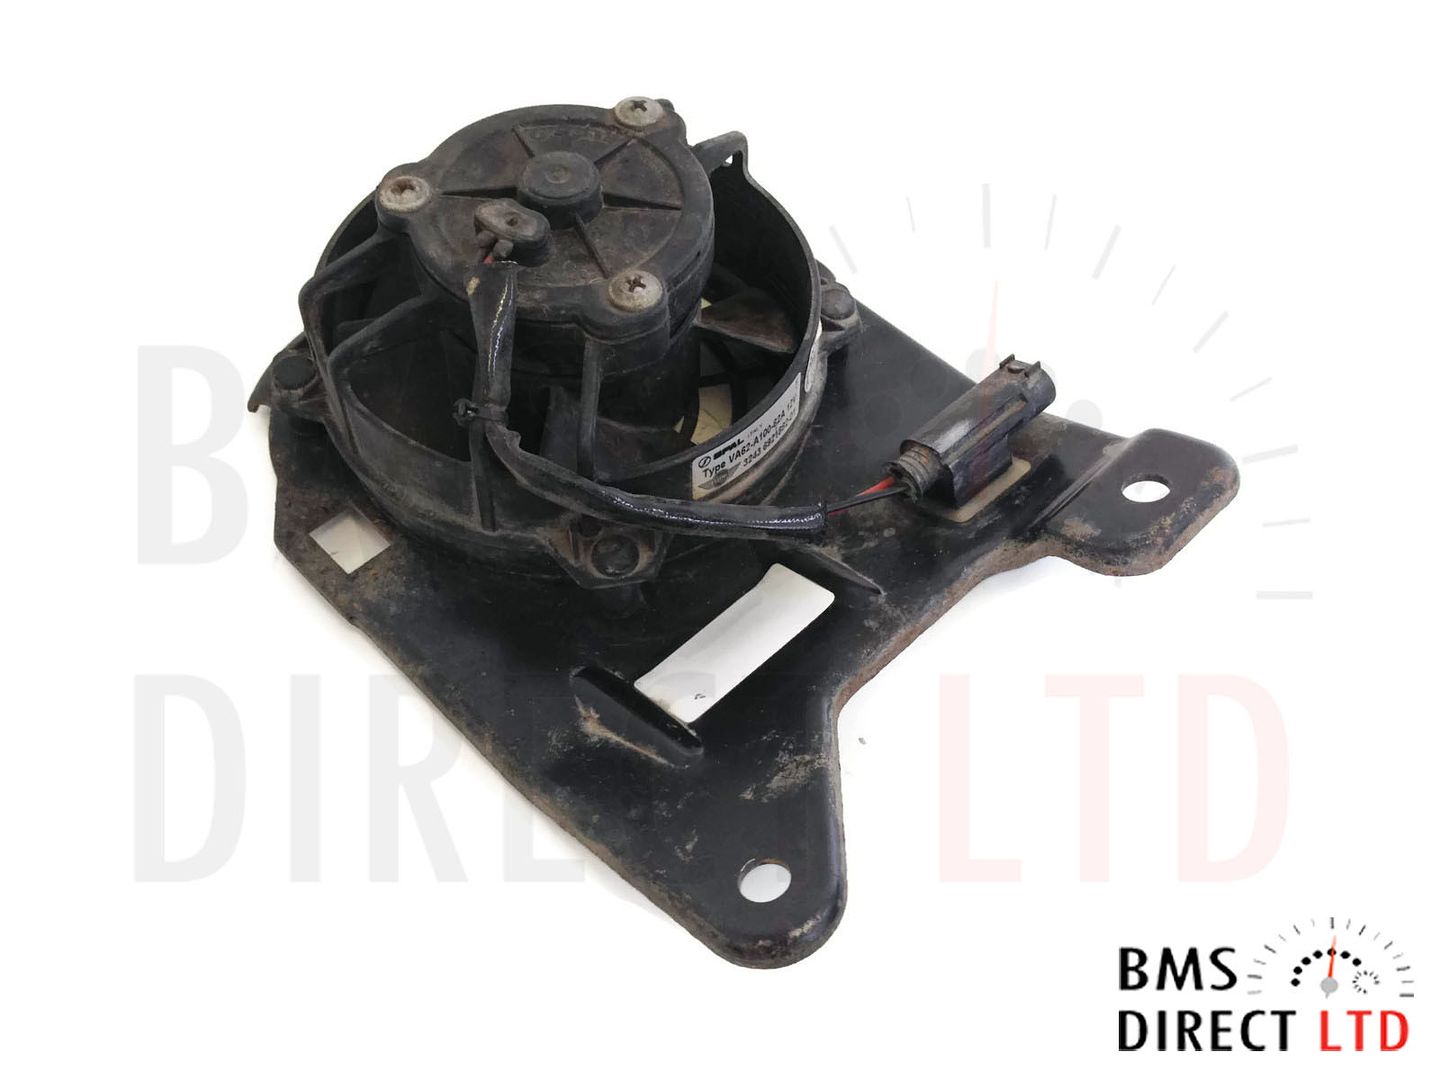 Power steering pump for bmw mini